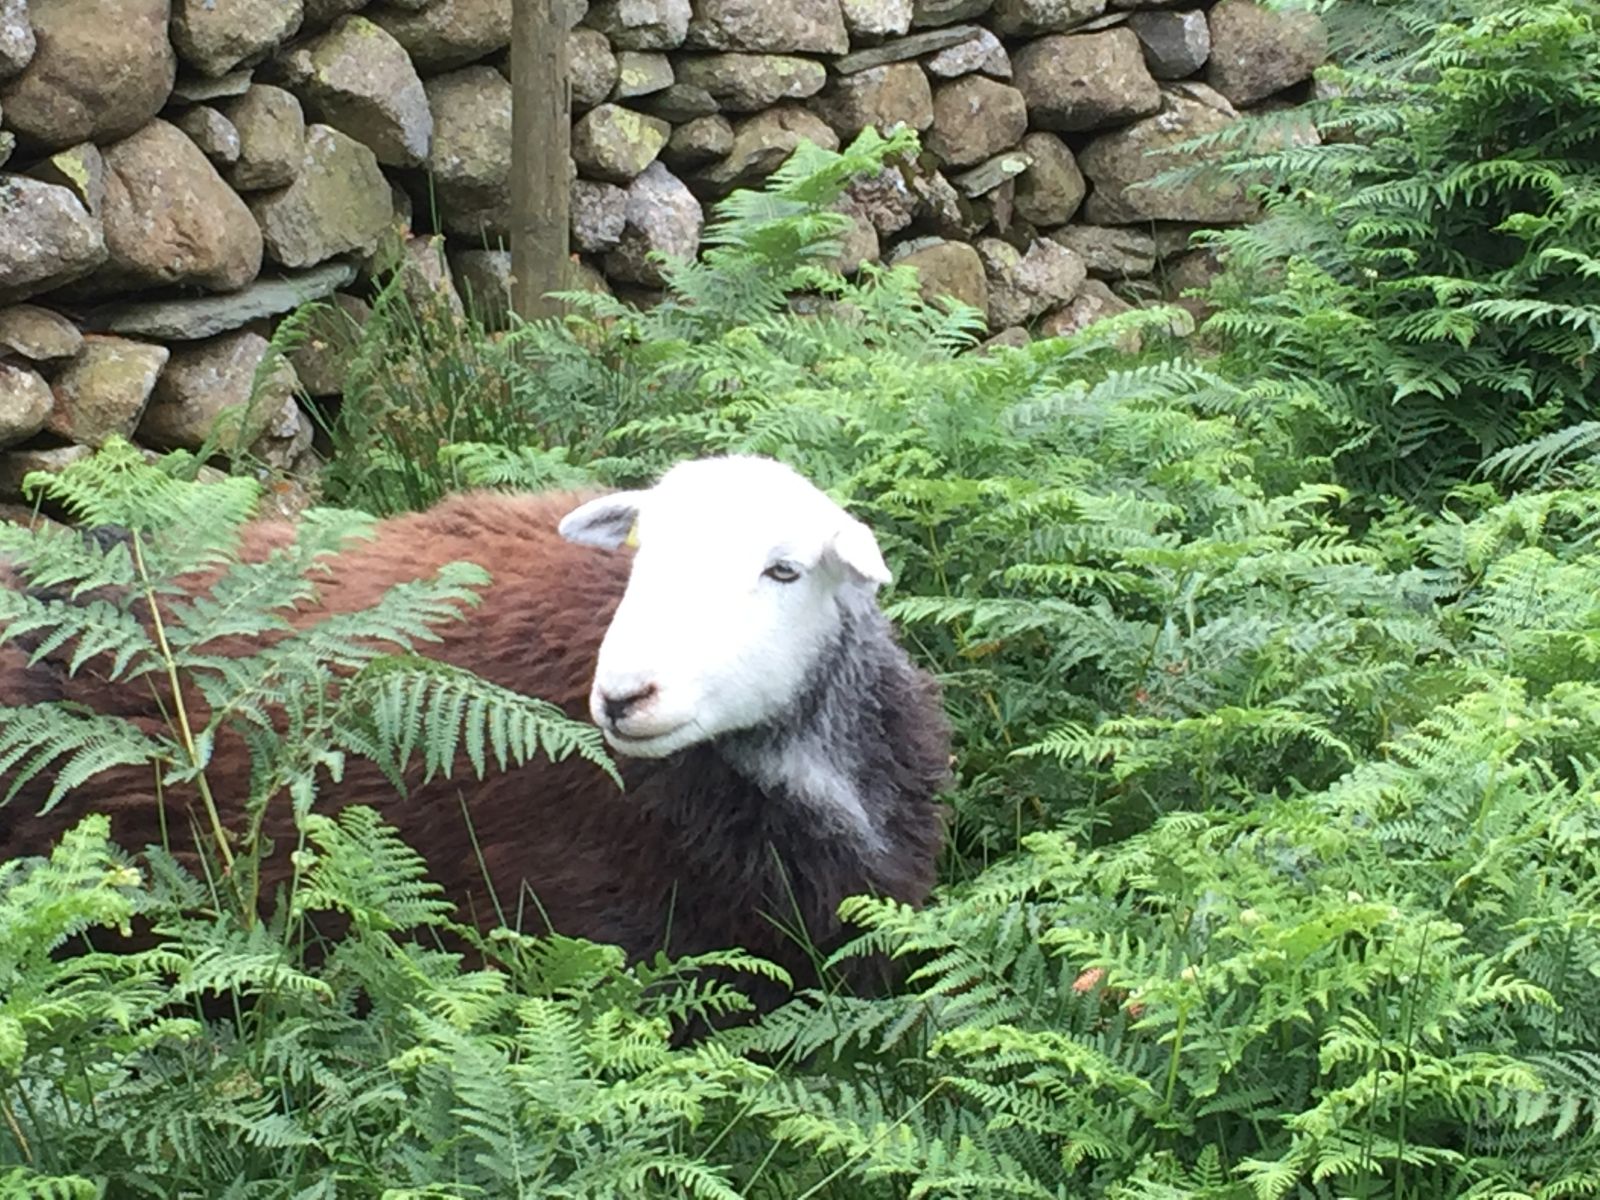 White faced sheep looking a little lost in the bracken